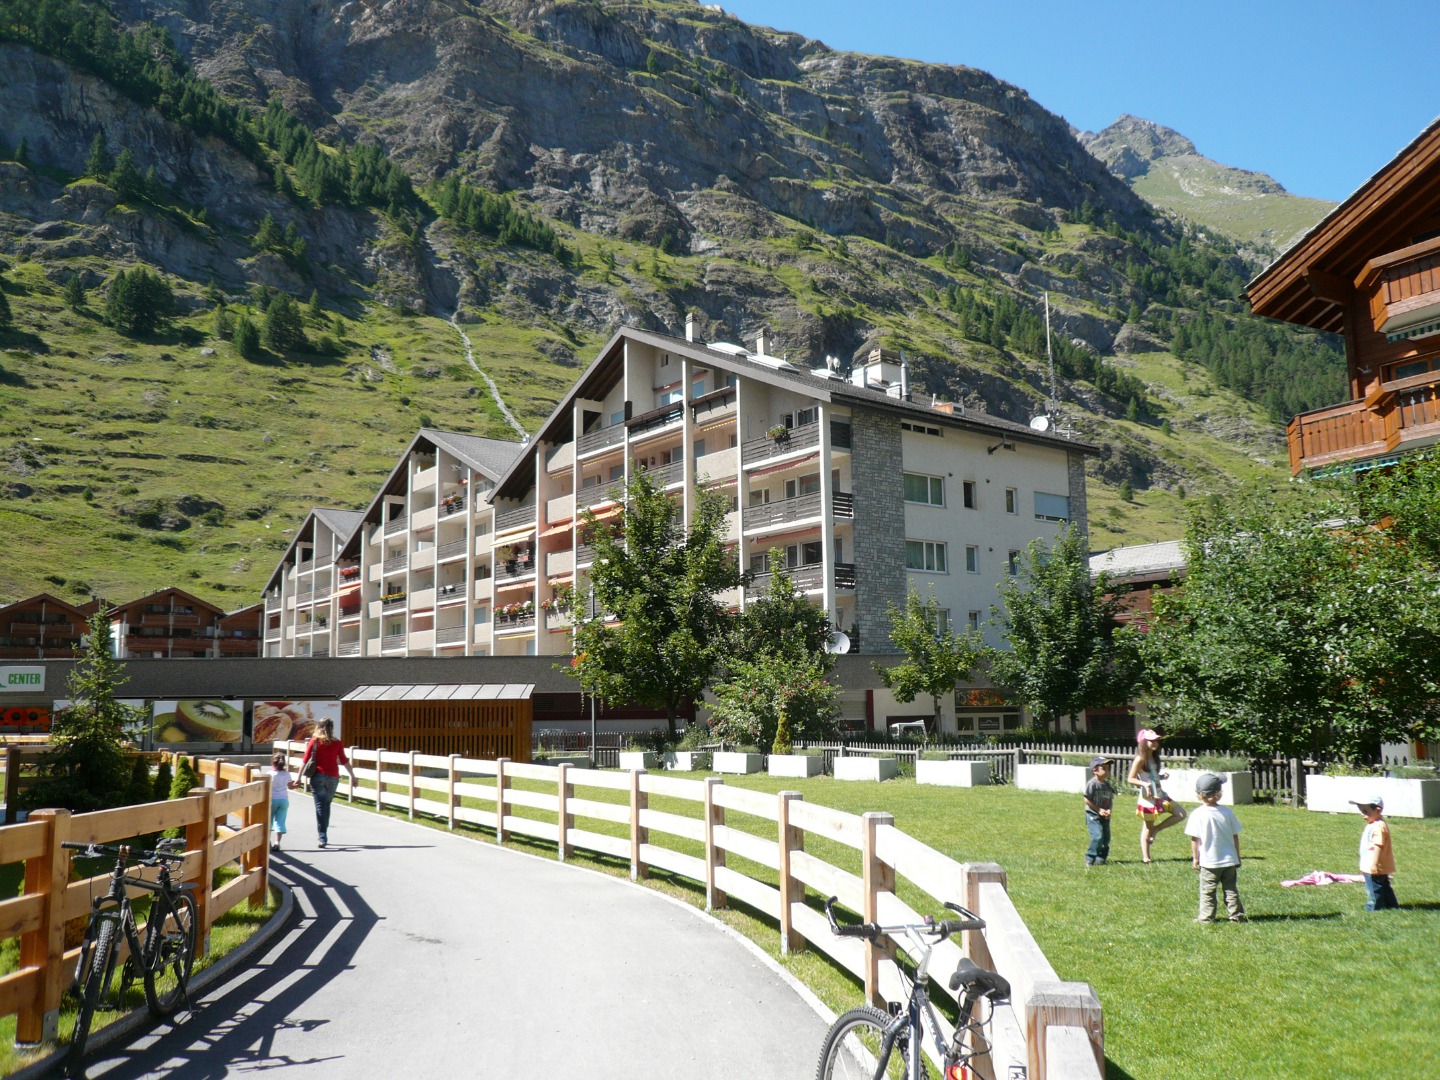 haus-viktoria-zermatt-summer-view-from-outside-exterior-view-in-front-of-mountains